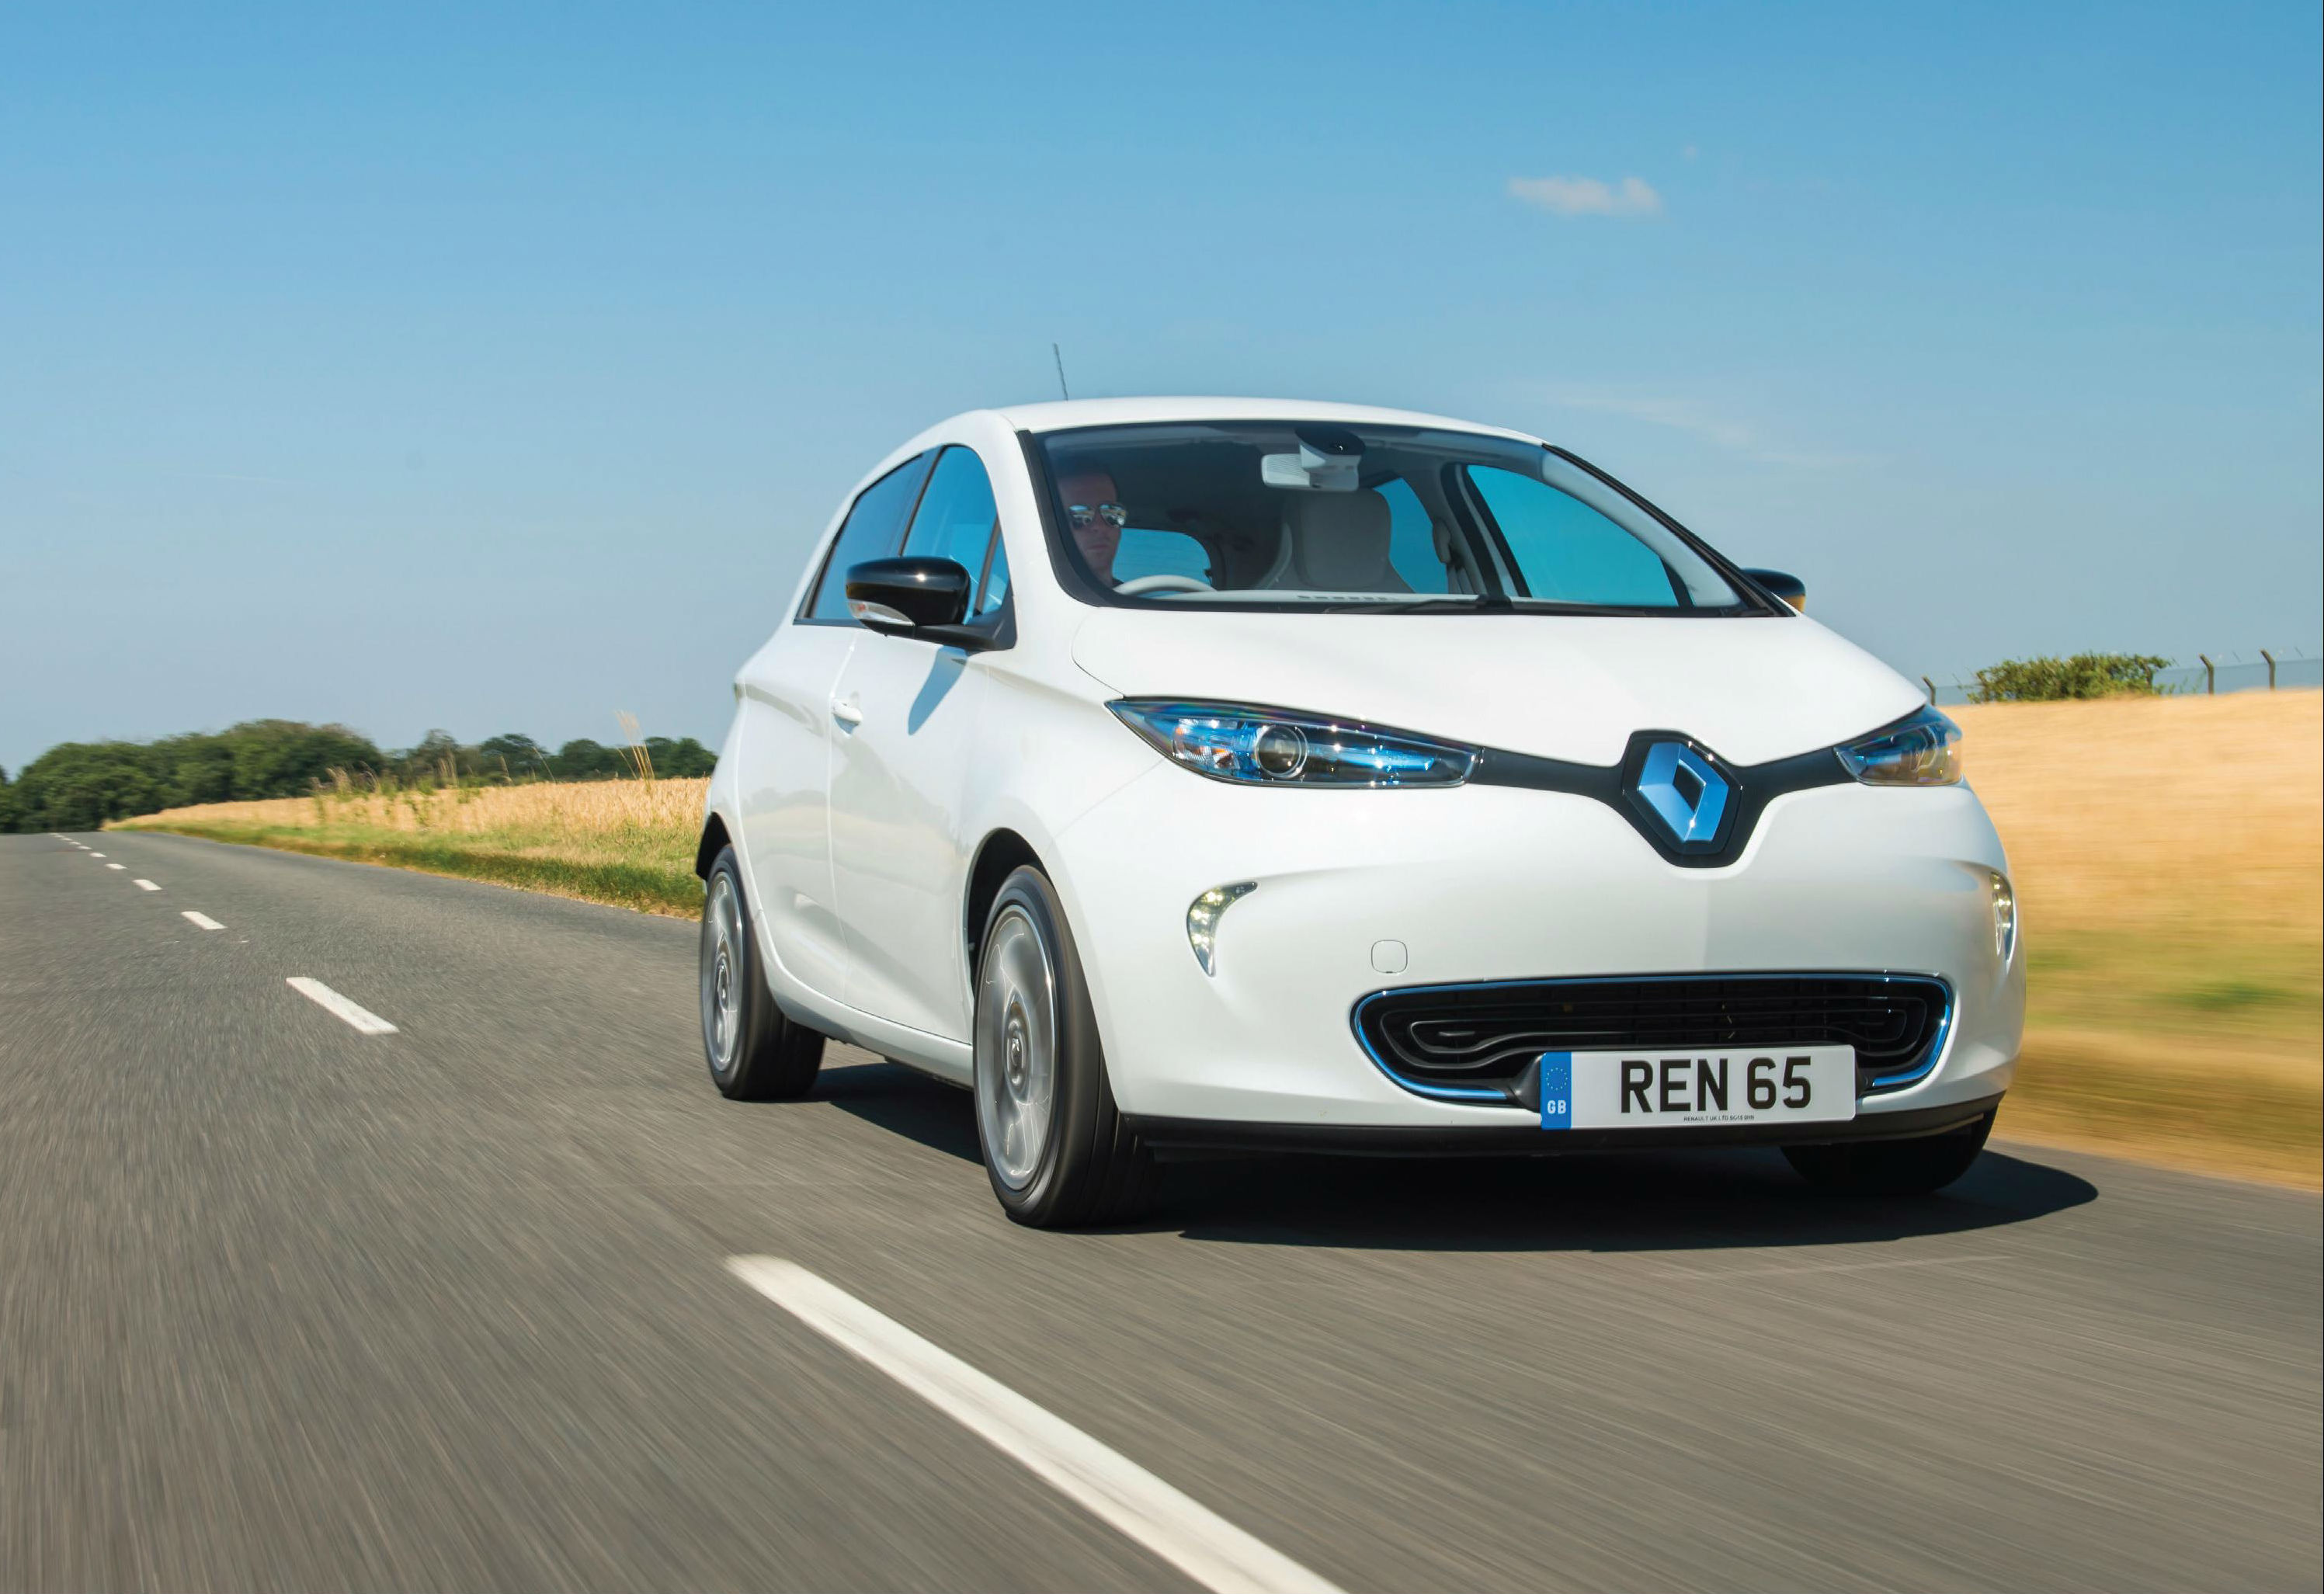 Used car buying guide: super-saver plug-in electric cars, including the Renault Zoe